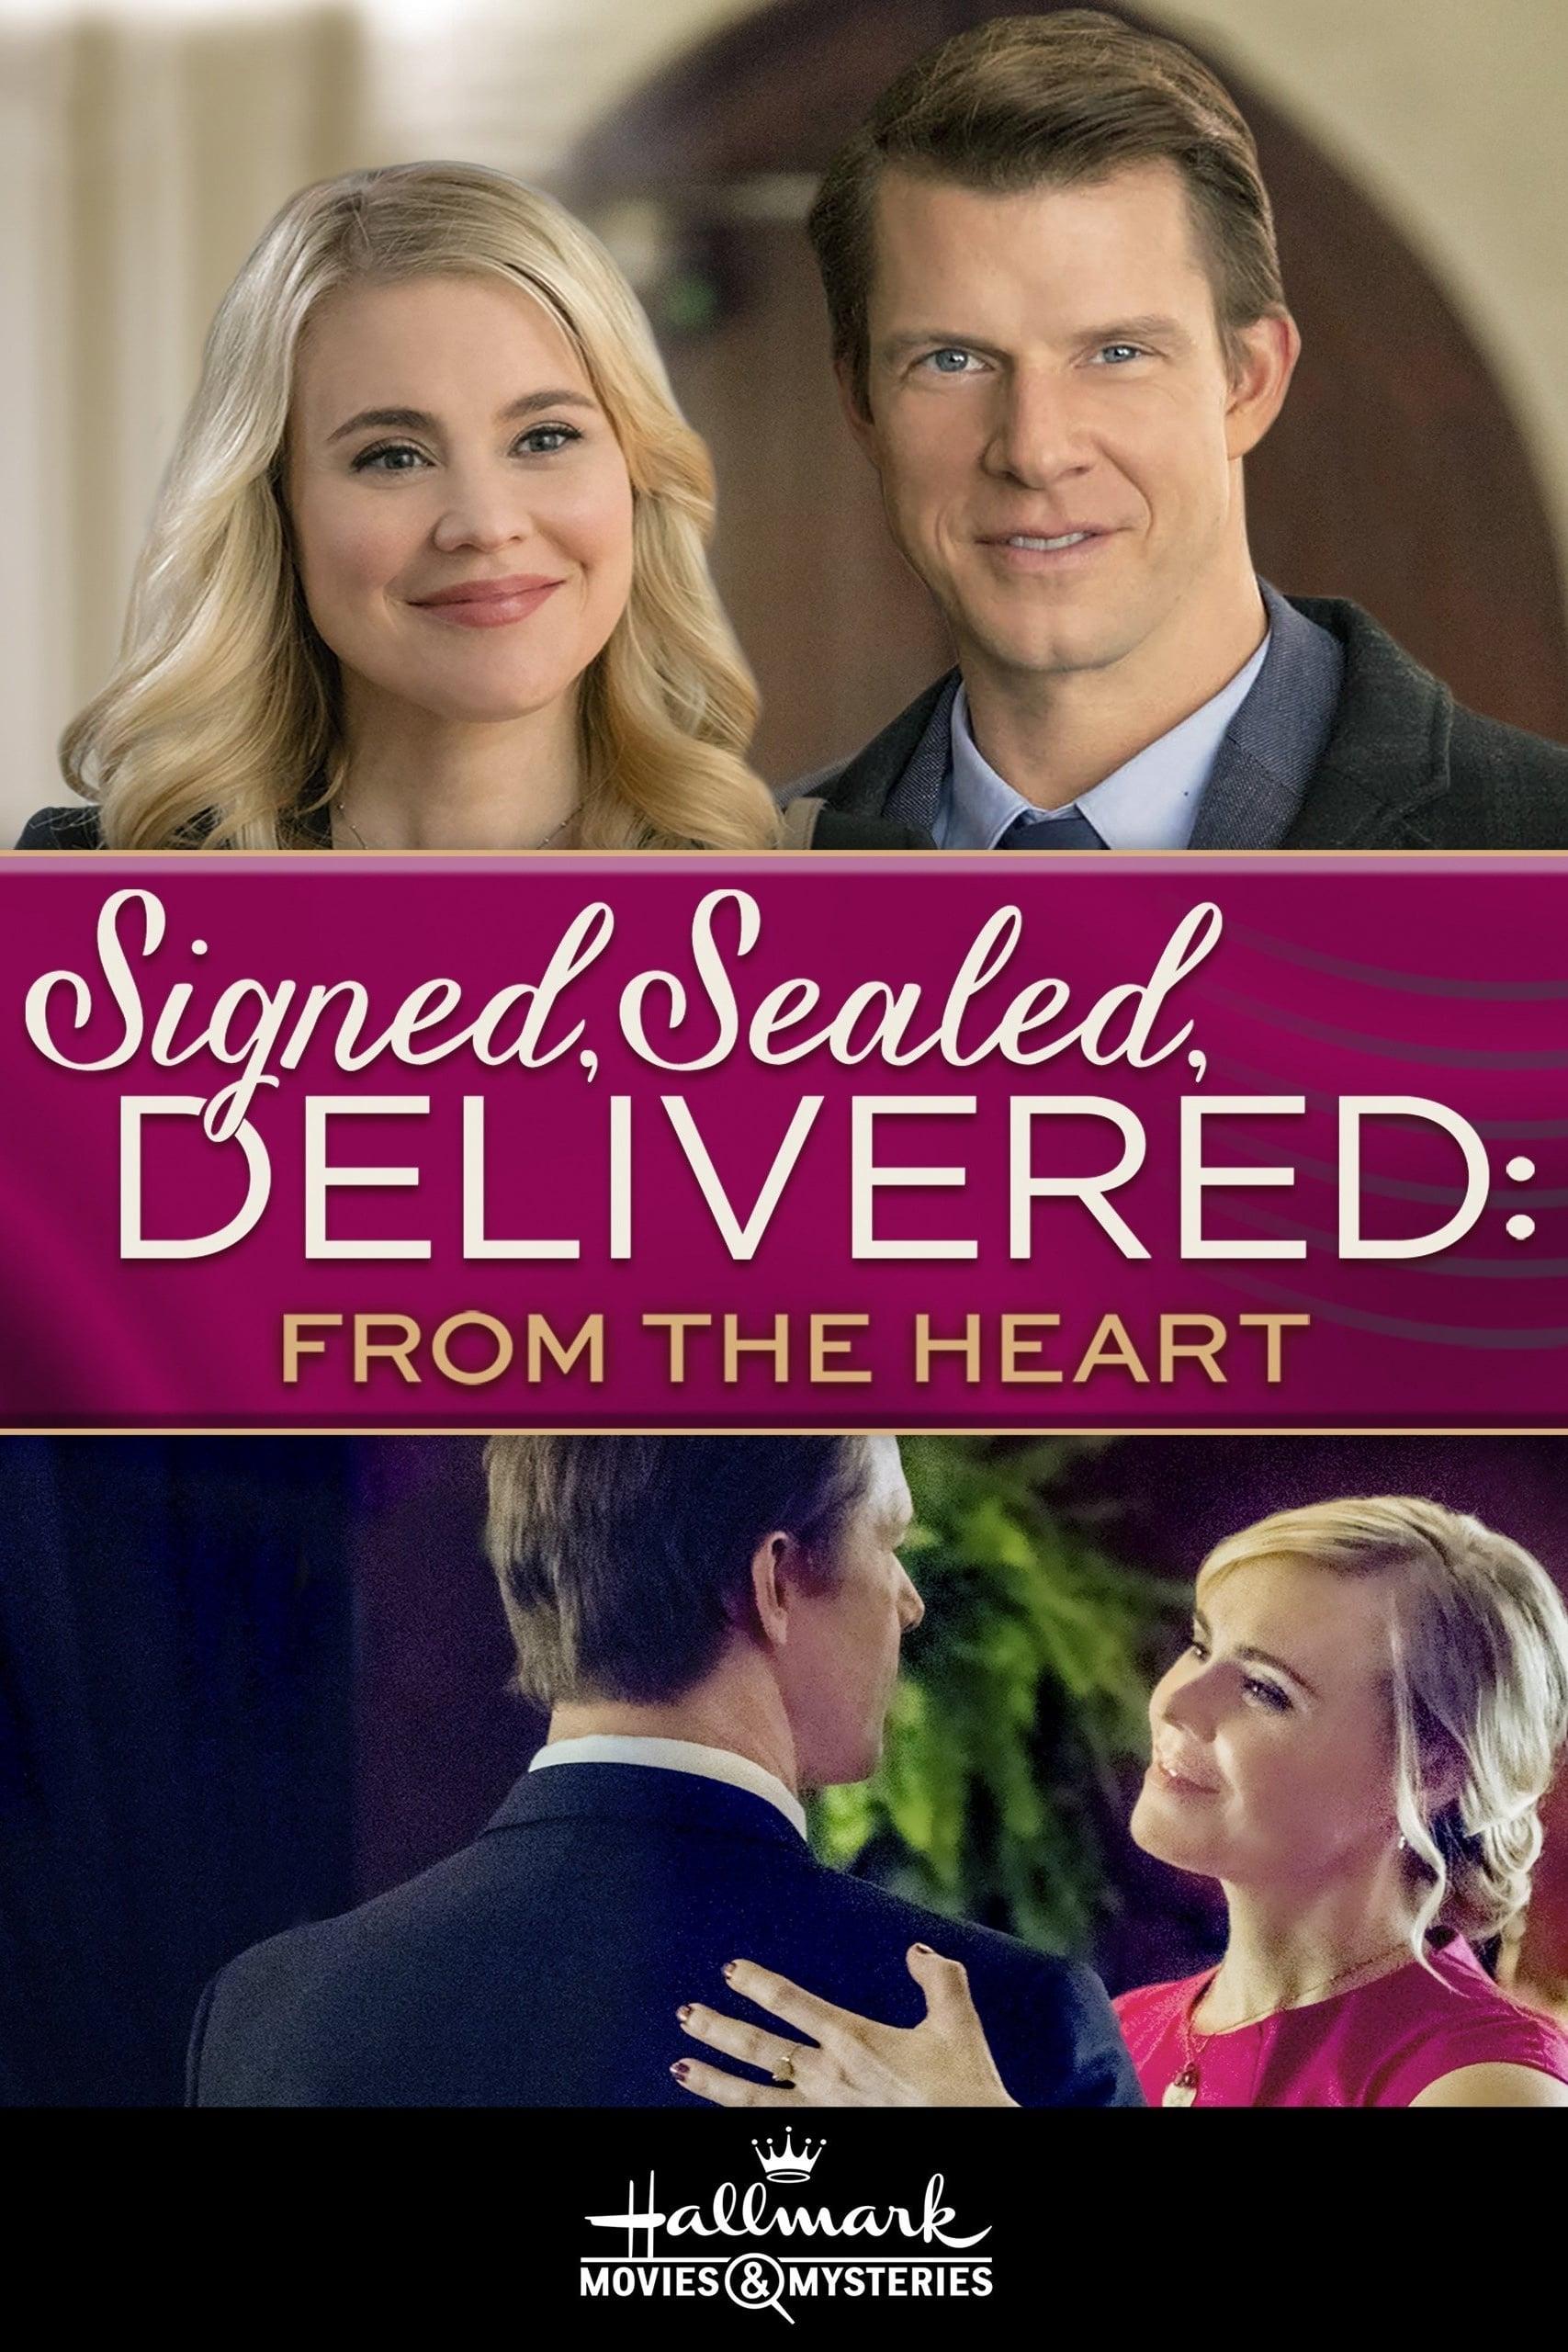 Signed, Sealed, Delivered: From the Heart poster